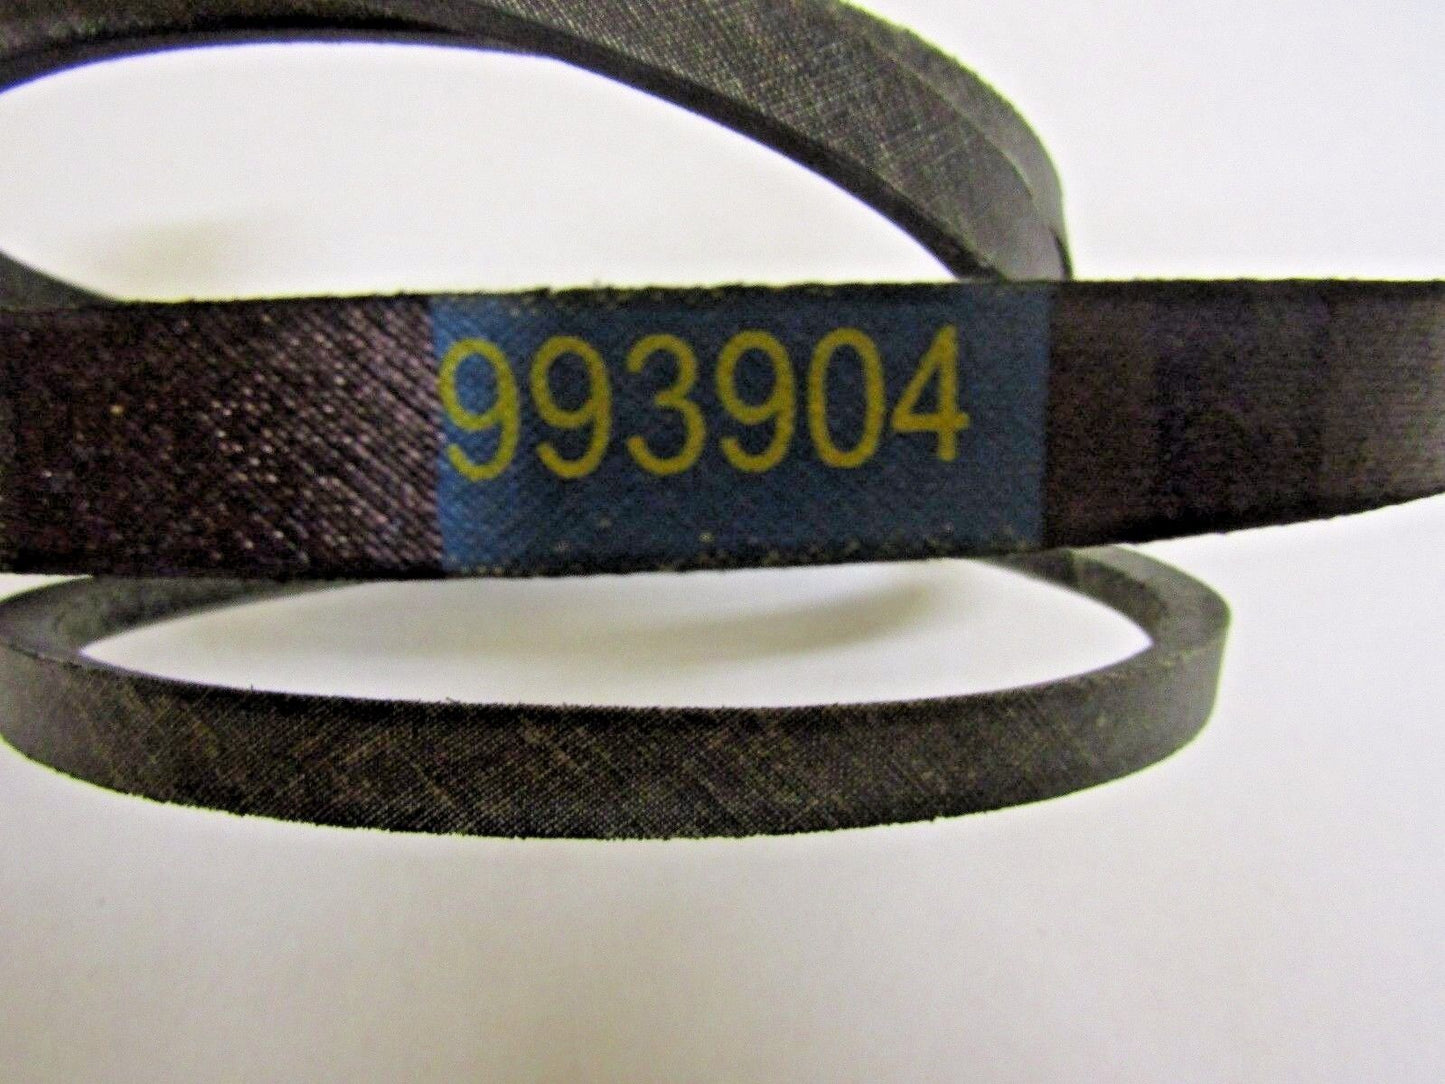 REPLACEMENT ARAMID OEM SPEC BELT TORO 99-3904 FOR Z MASTER WITH 52" DECK